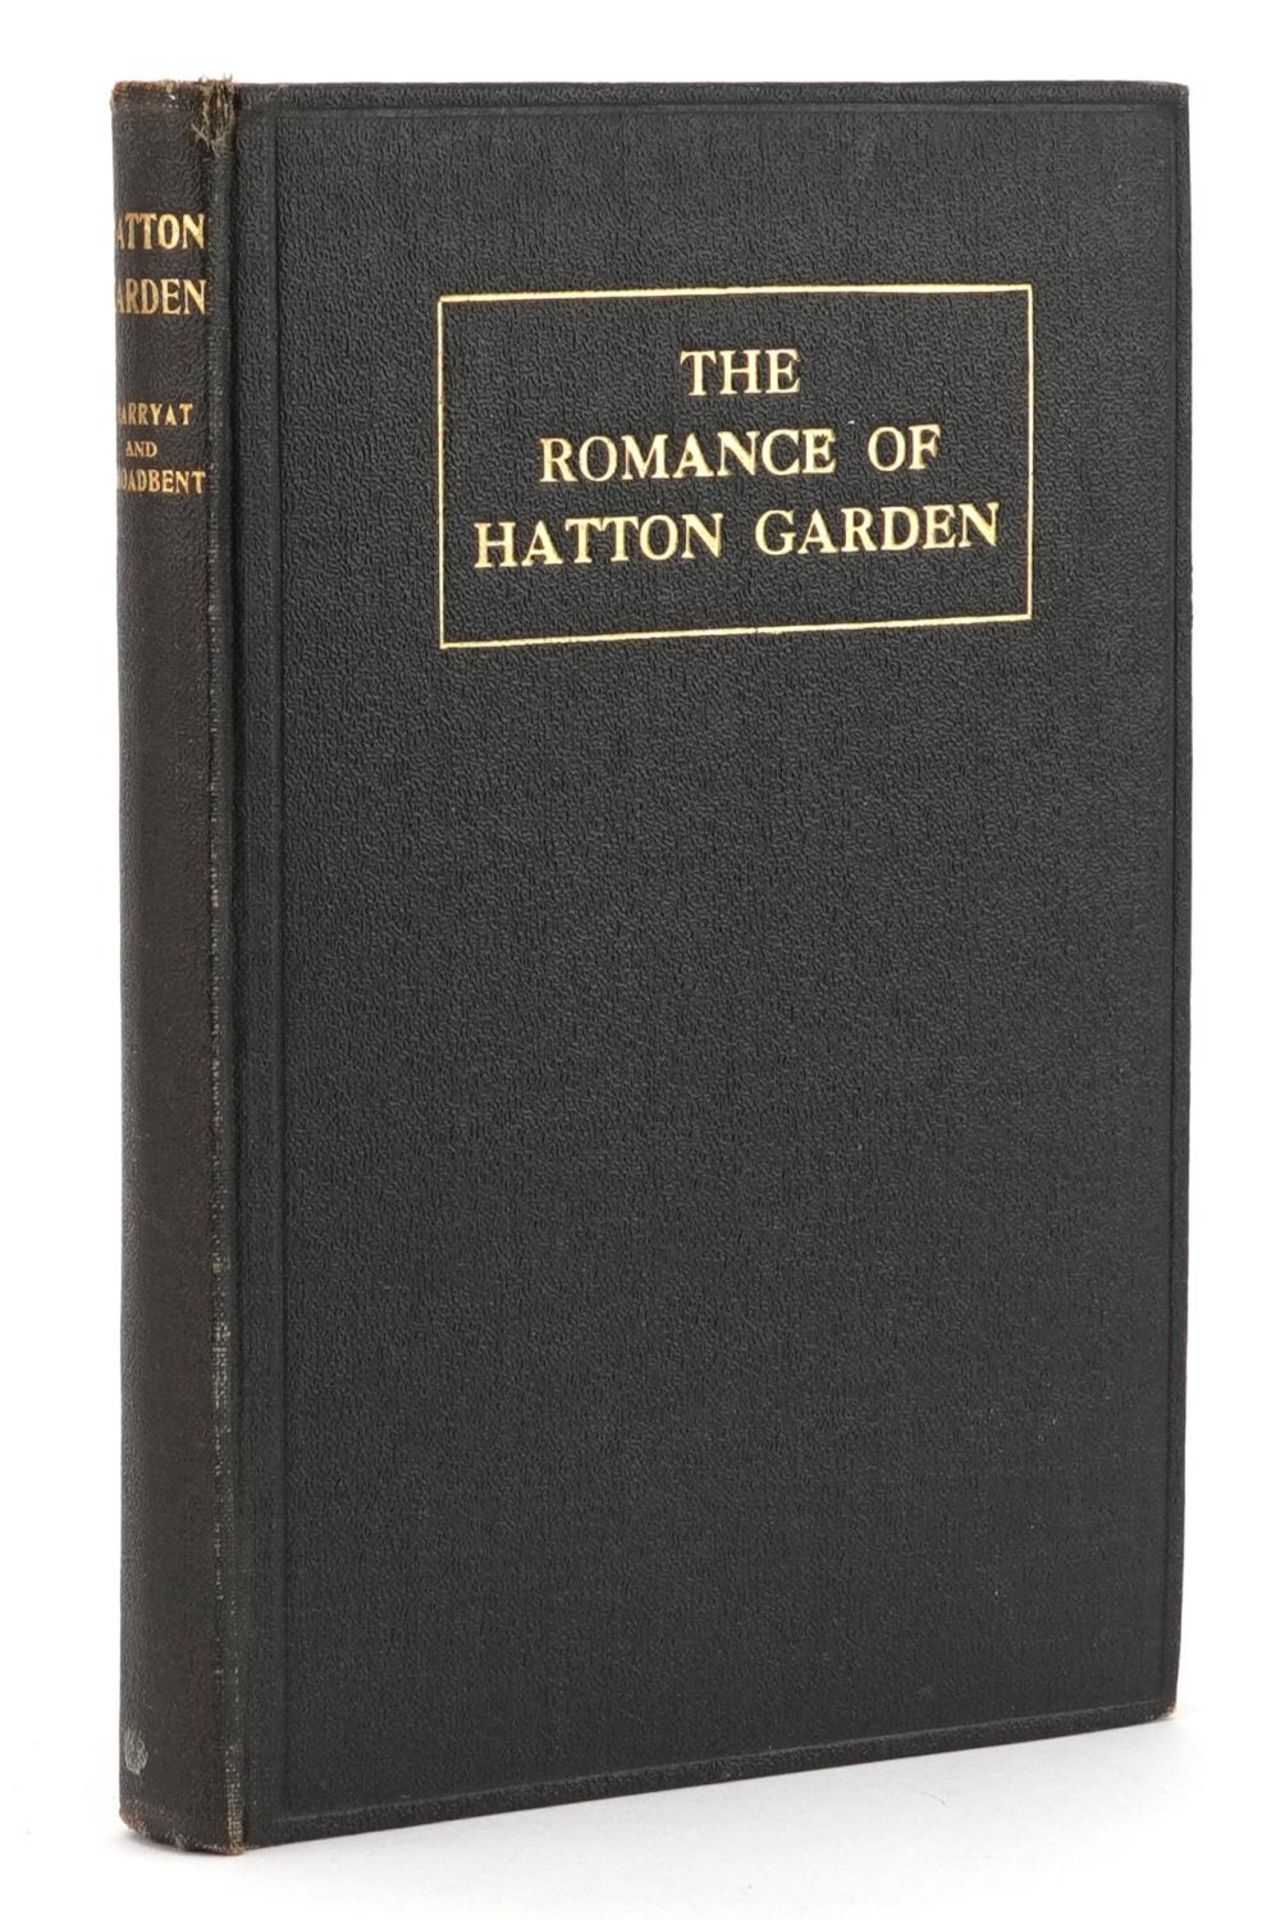 The Romance of Hatton Garden with black and white plates and fold out street map, first edition by